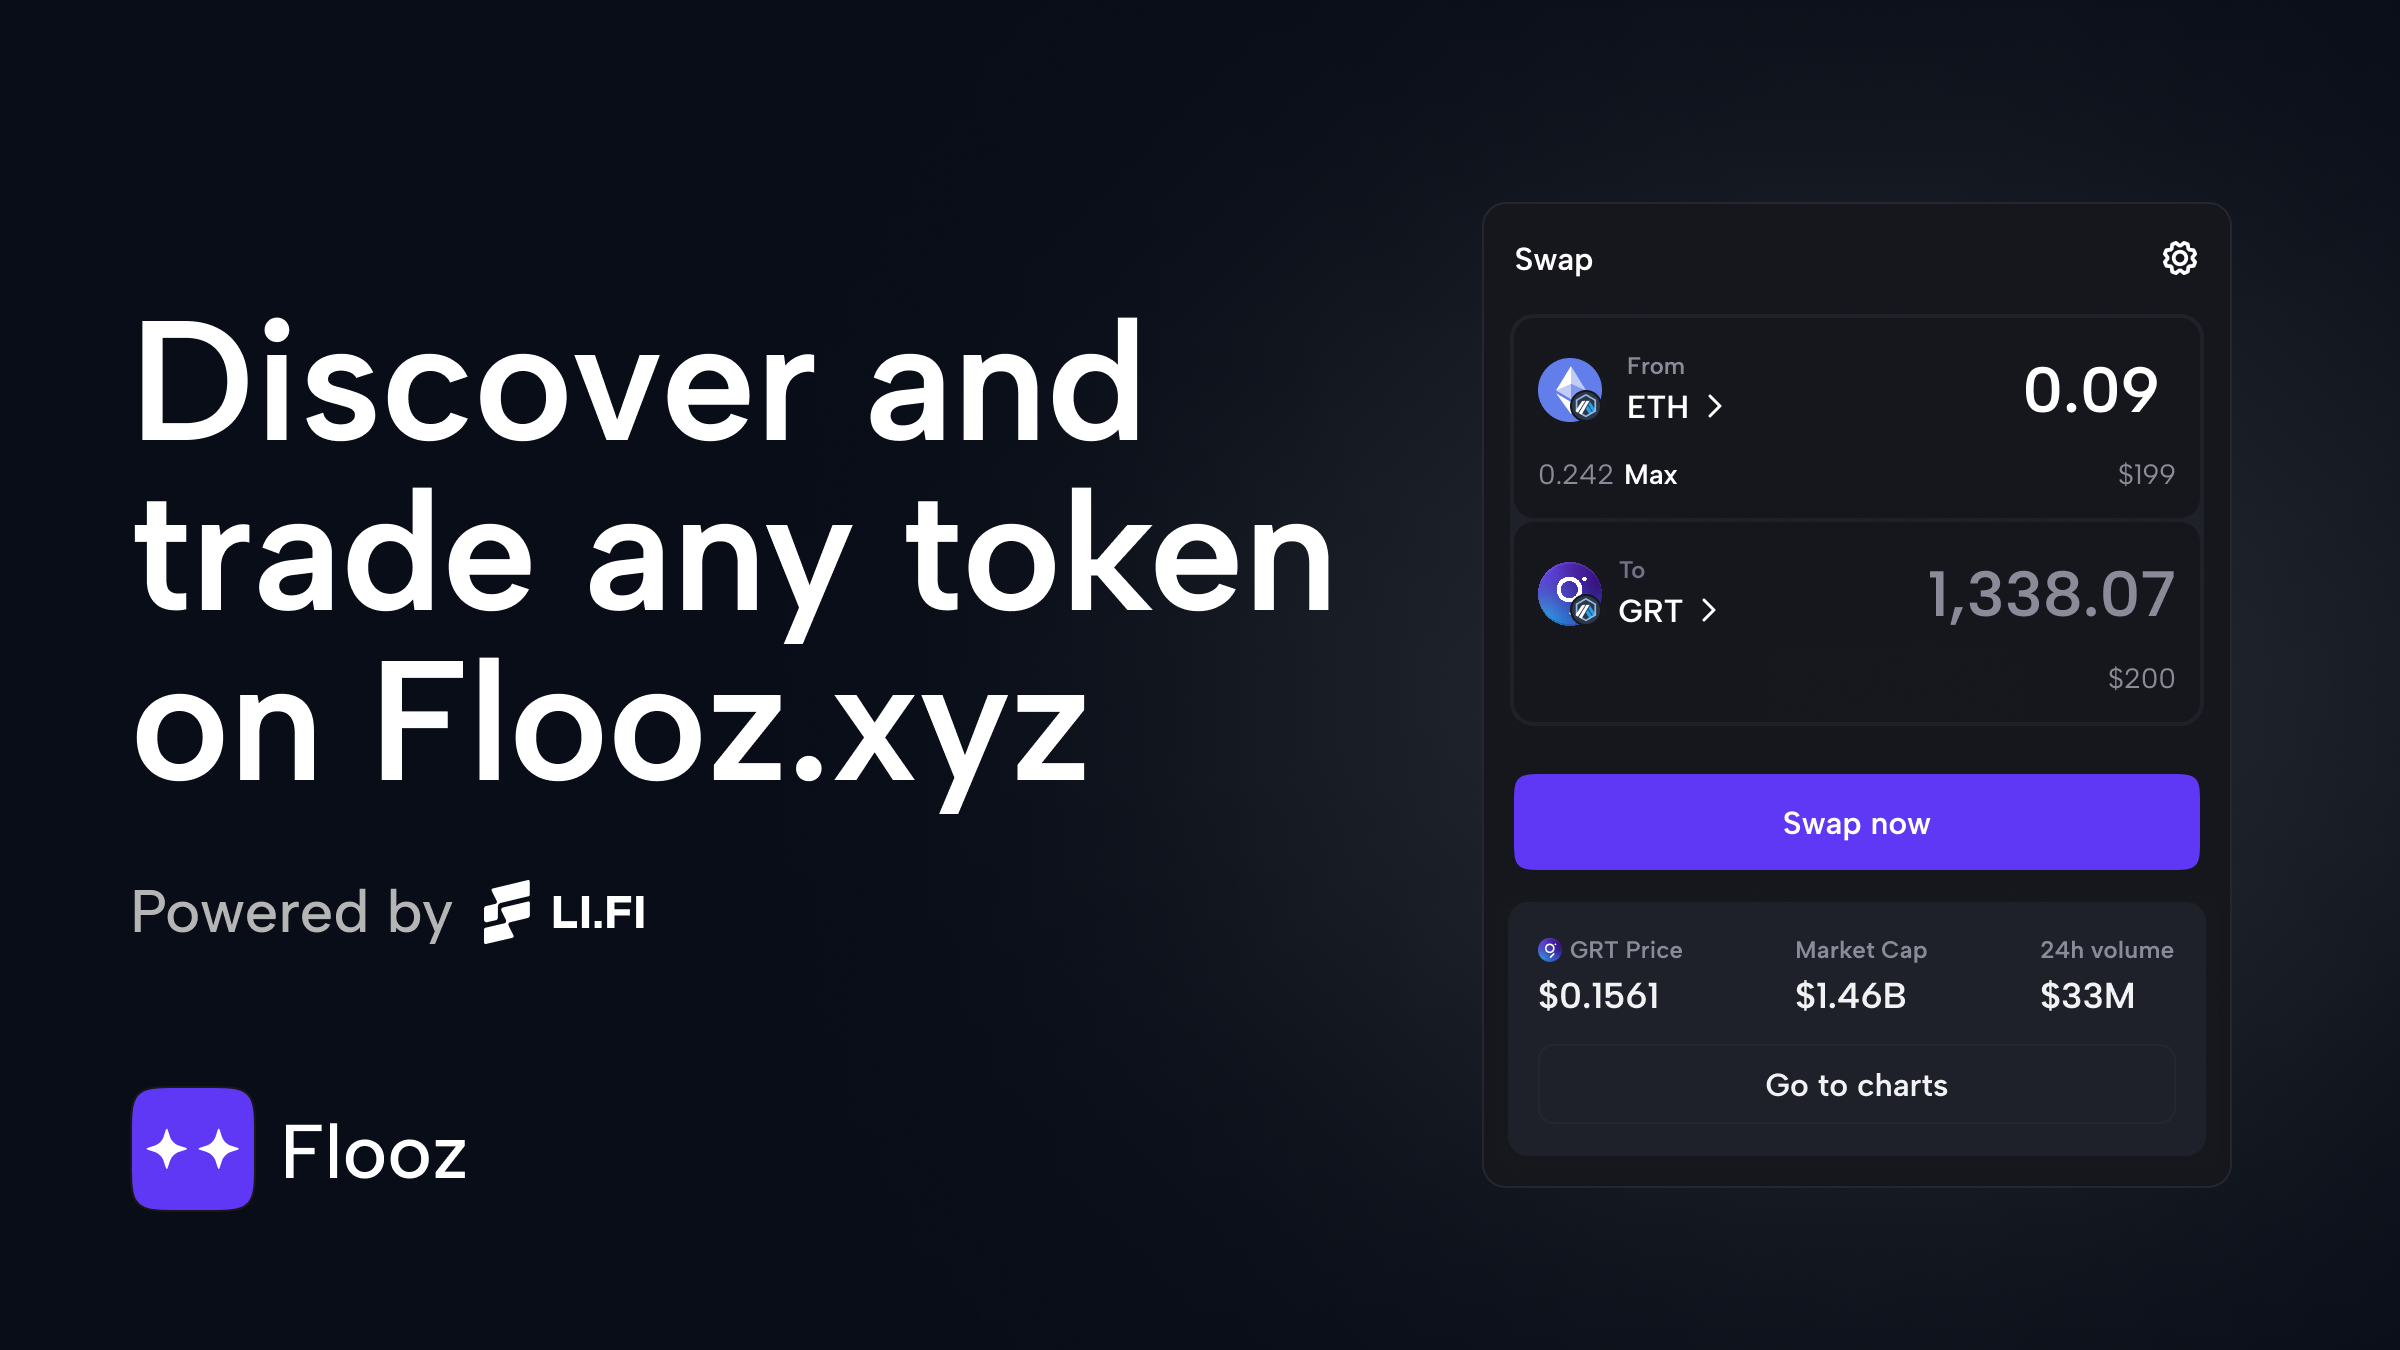 Discover and trade any token on Flooz.xyz